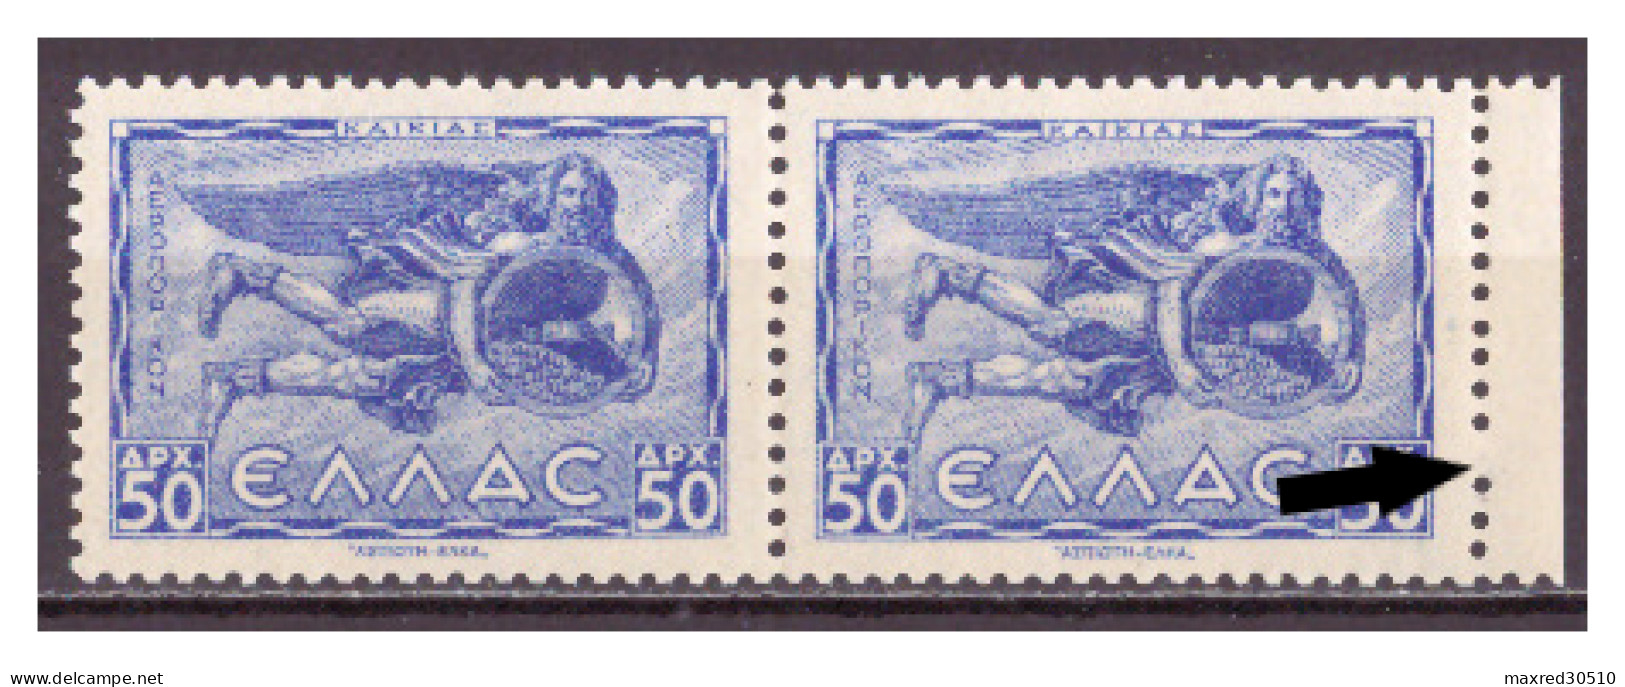 GREECE 1943 AIRPOST ISSUE HORIZONTAL PAIR 50DR. OF "WINDS II" WITH PRINTING ERROR AT THE RIGHT PERFORATION SEE DESCRIBE - Varietà & Curiosità